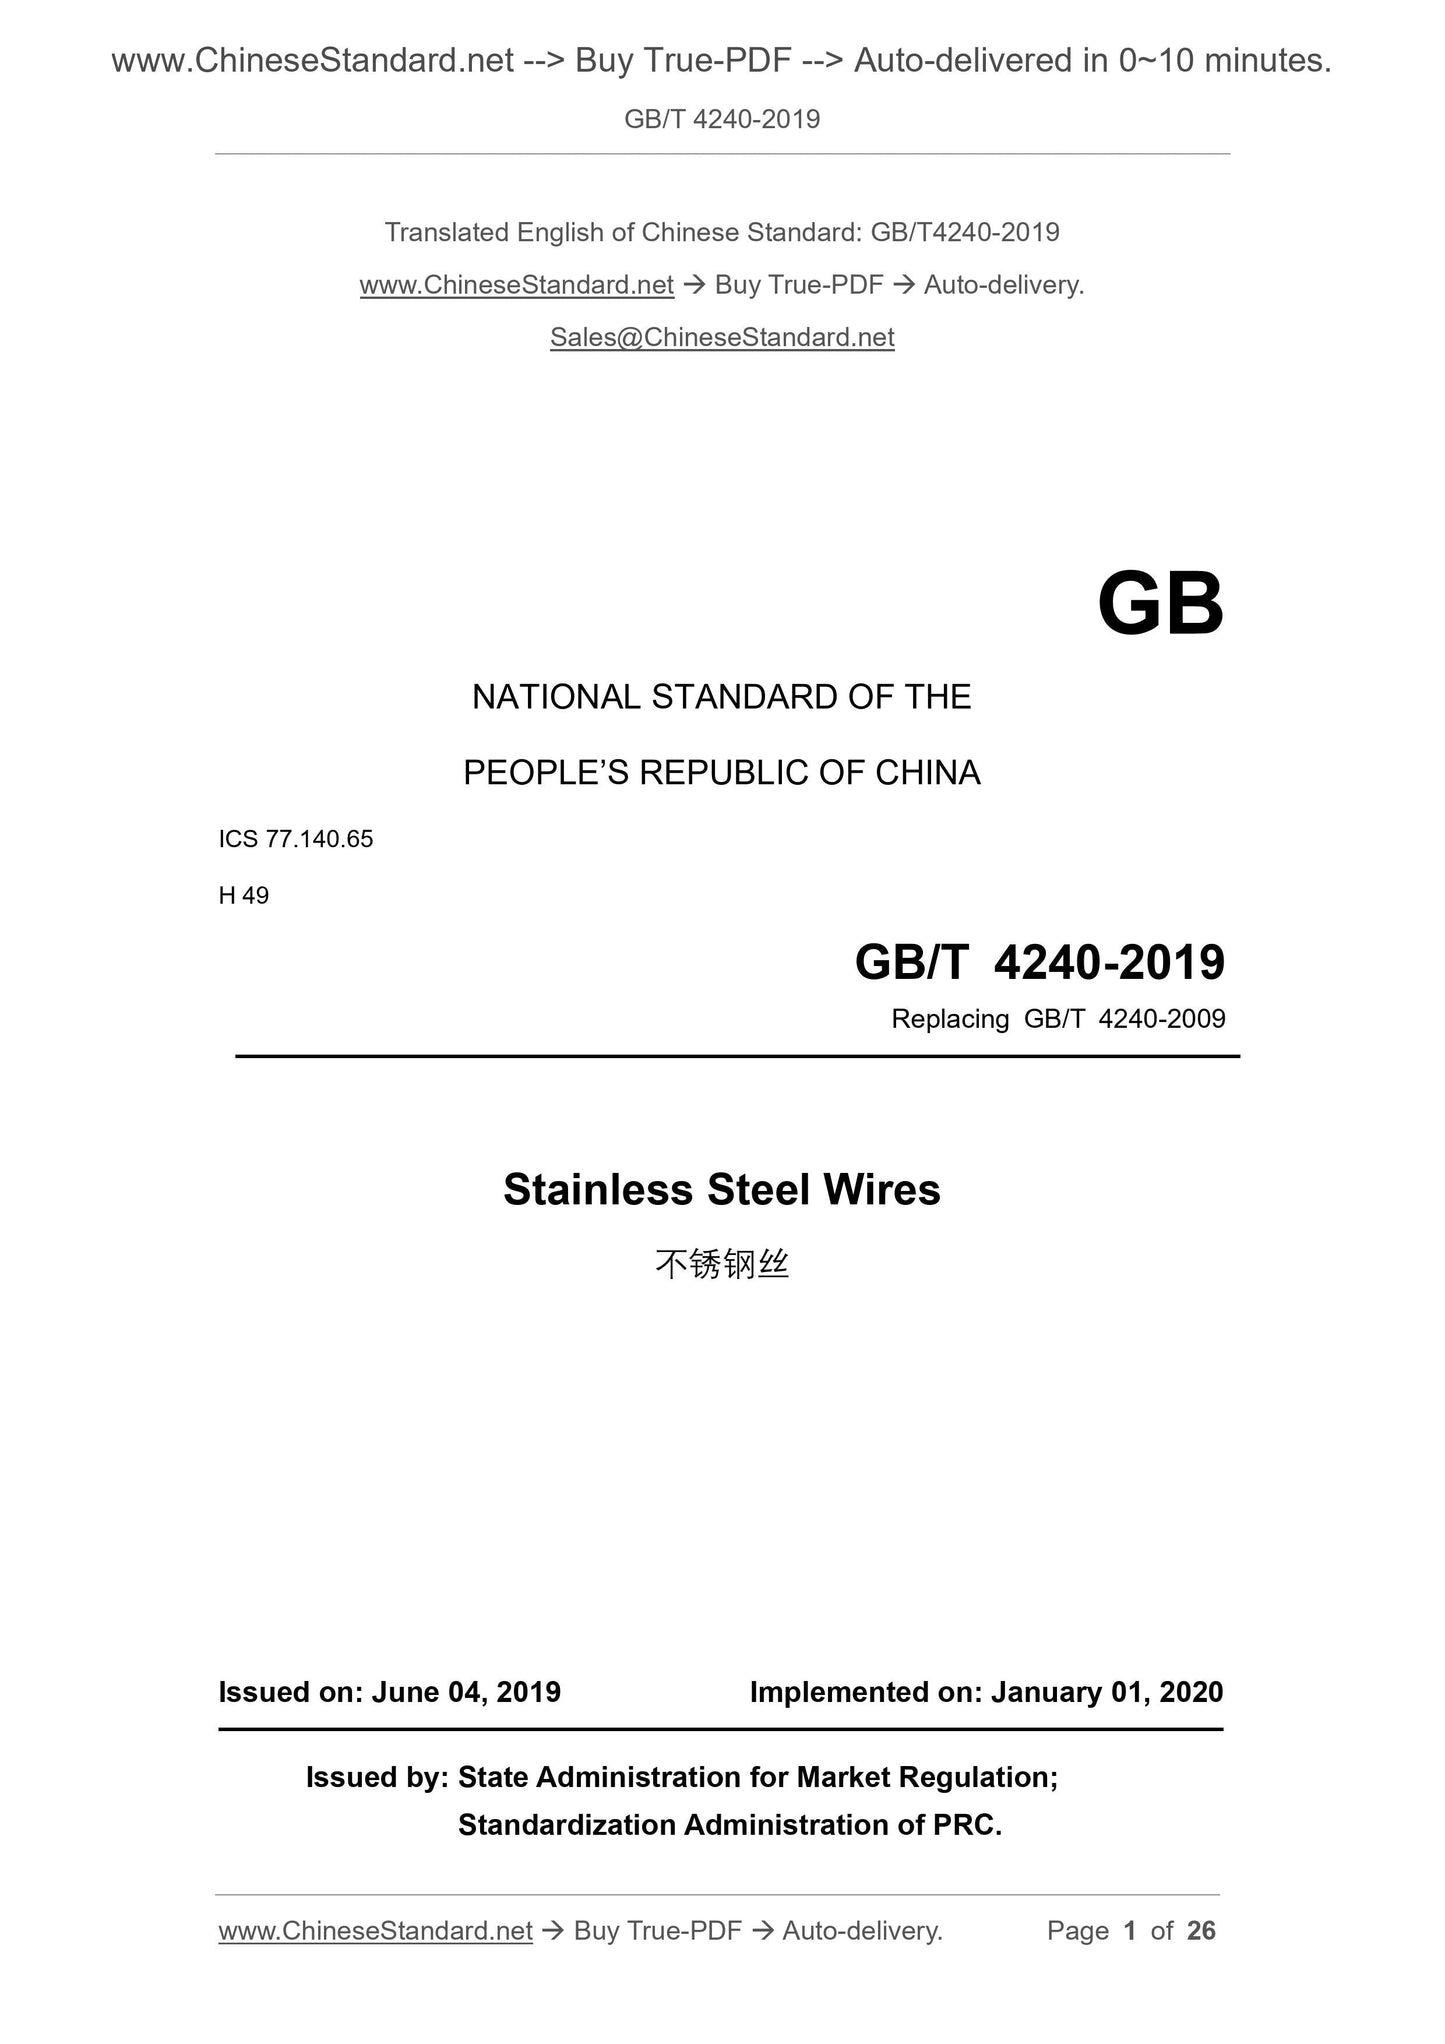 GB/T 4240-2019 Page 1